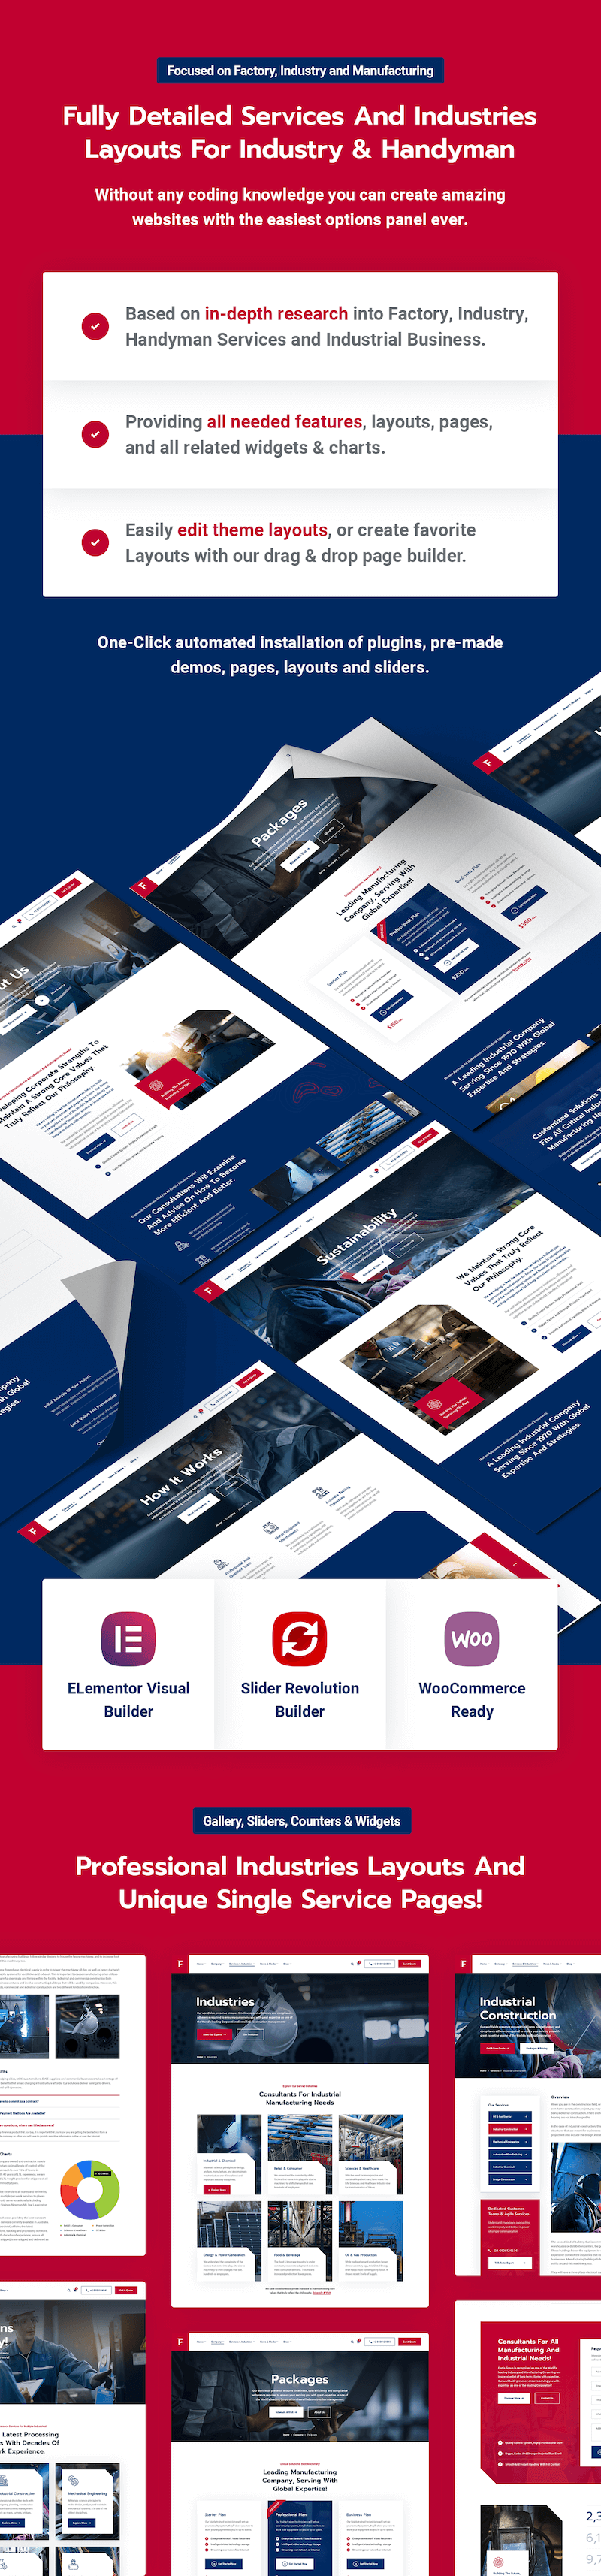 Fortis - Factory Industrial Business & Handyman Services WordPress Theme - 6